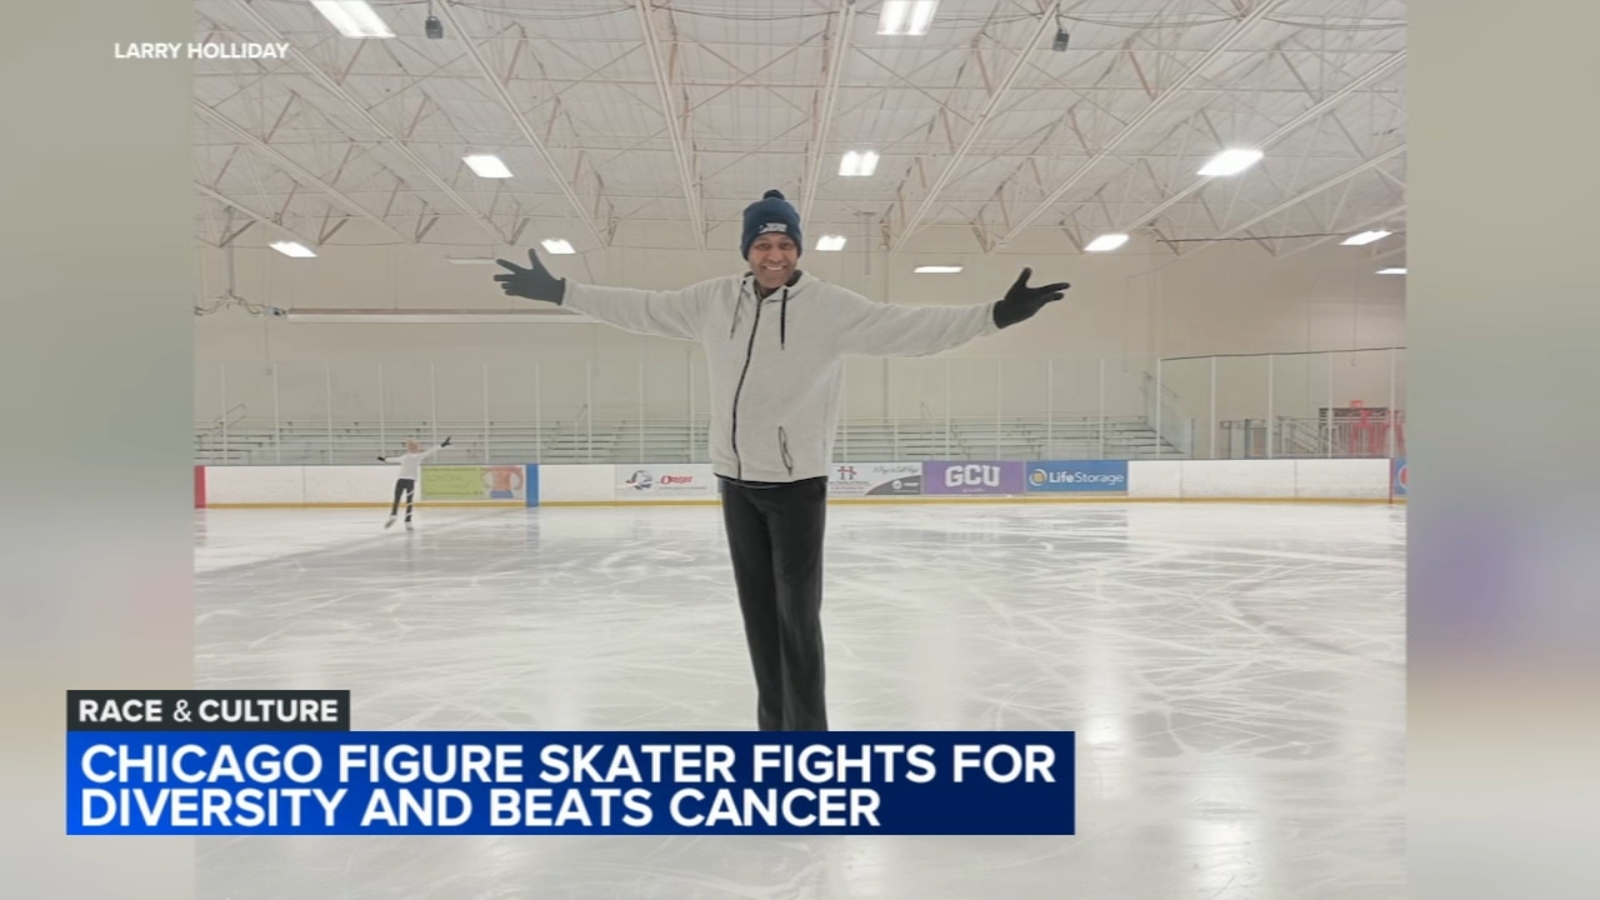 Chicago ice skater Larry Holliday overcomes brain cancer in effort to compete again at nearly 60, inspire others [Video]